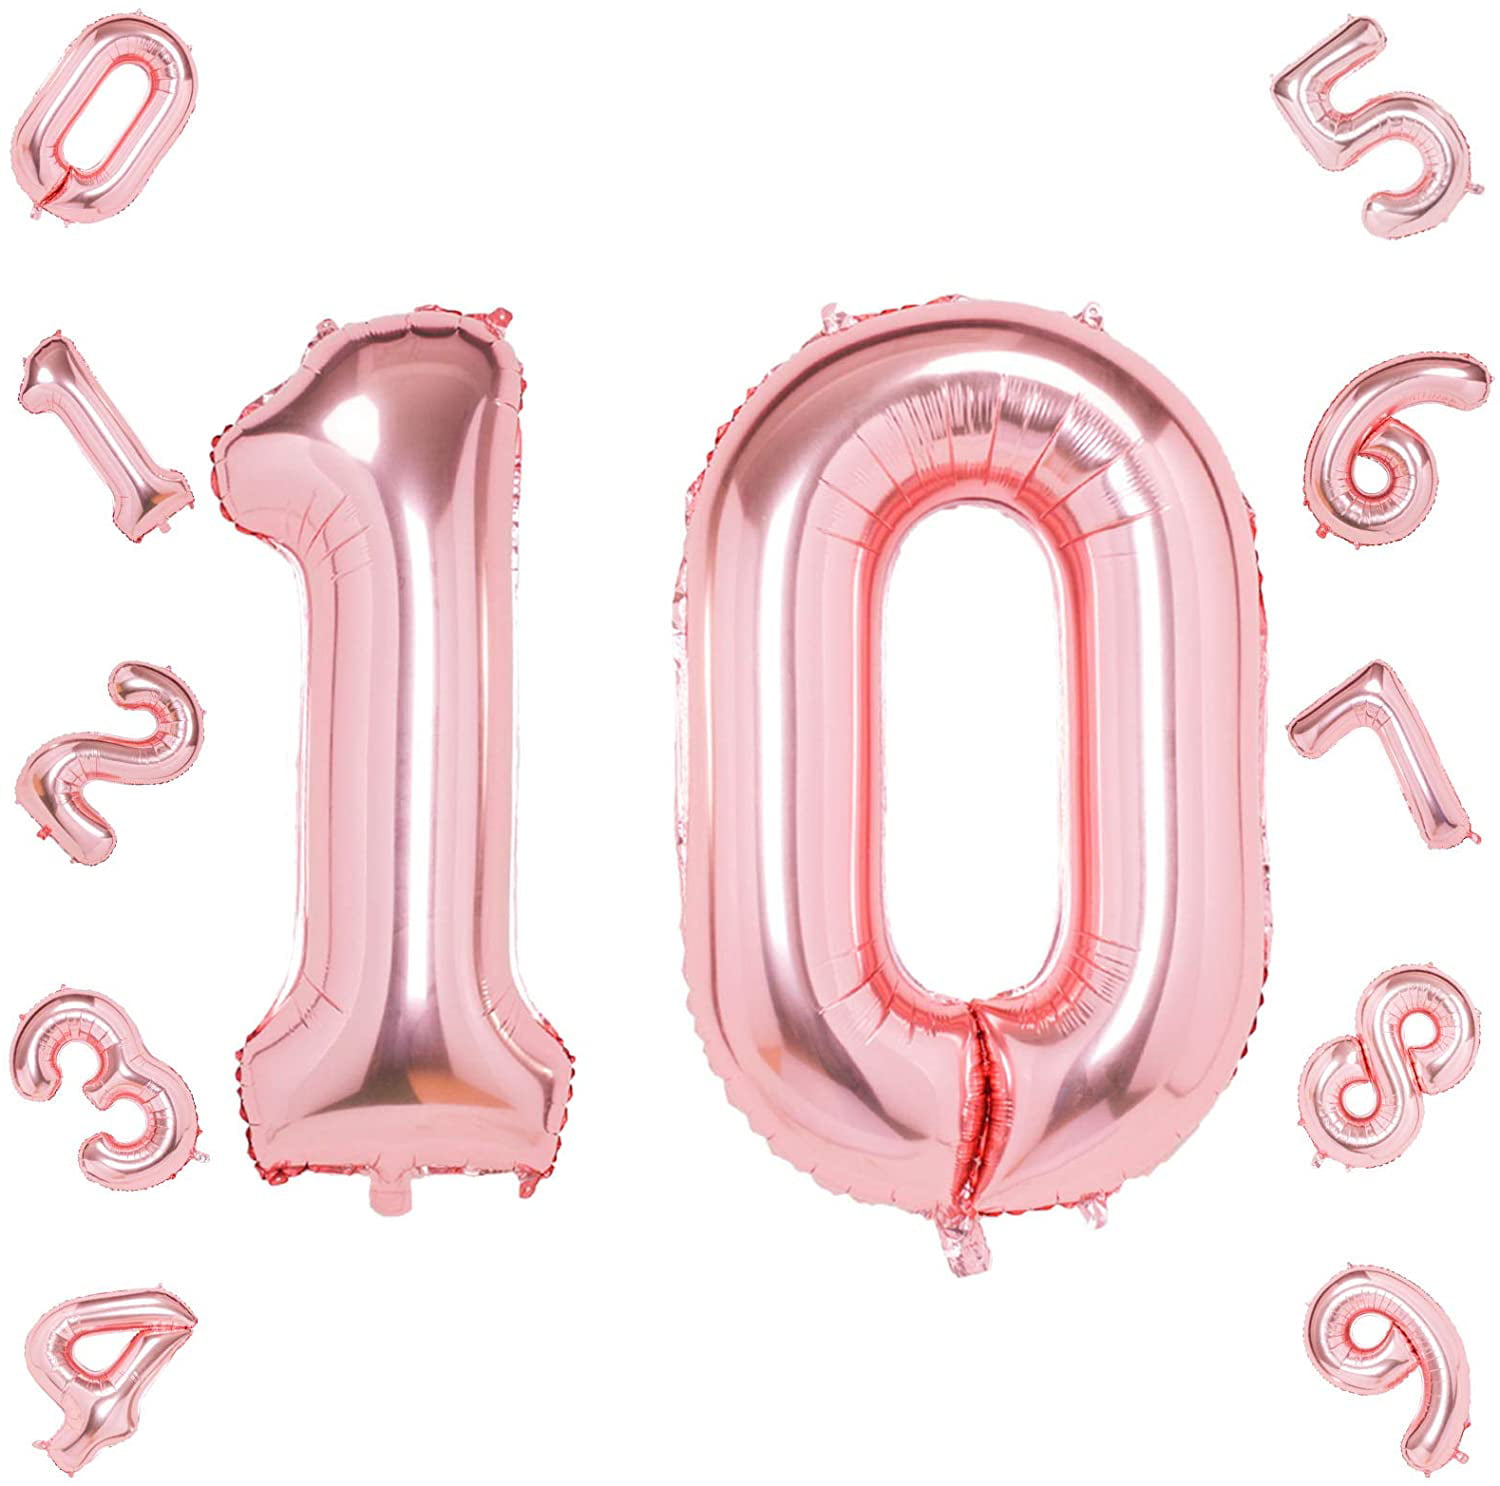 Rose Gold Number 10 Rose Gold Number 10 Balloons,40 Inch Birthday Number Balloon Party Decorations Supplies Helium Foil Mylar Digital Balloons 